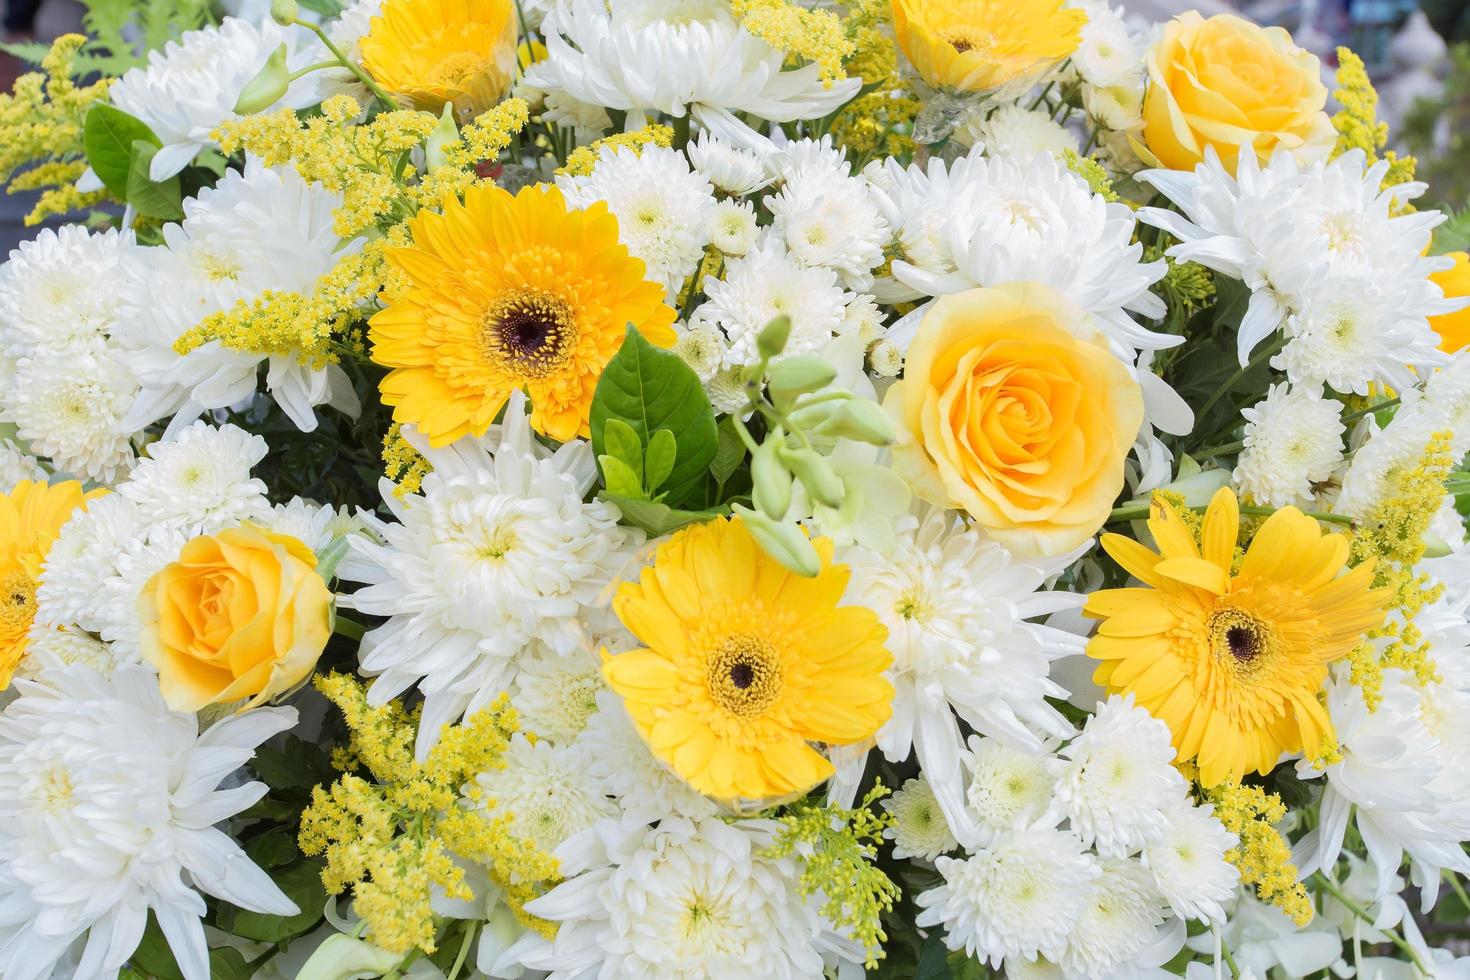 Yellow and white Chrysanthemum flowers, rose was decorated with green leaves as wreath to use in funeral. photo